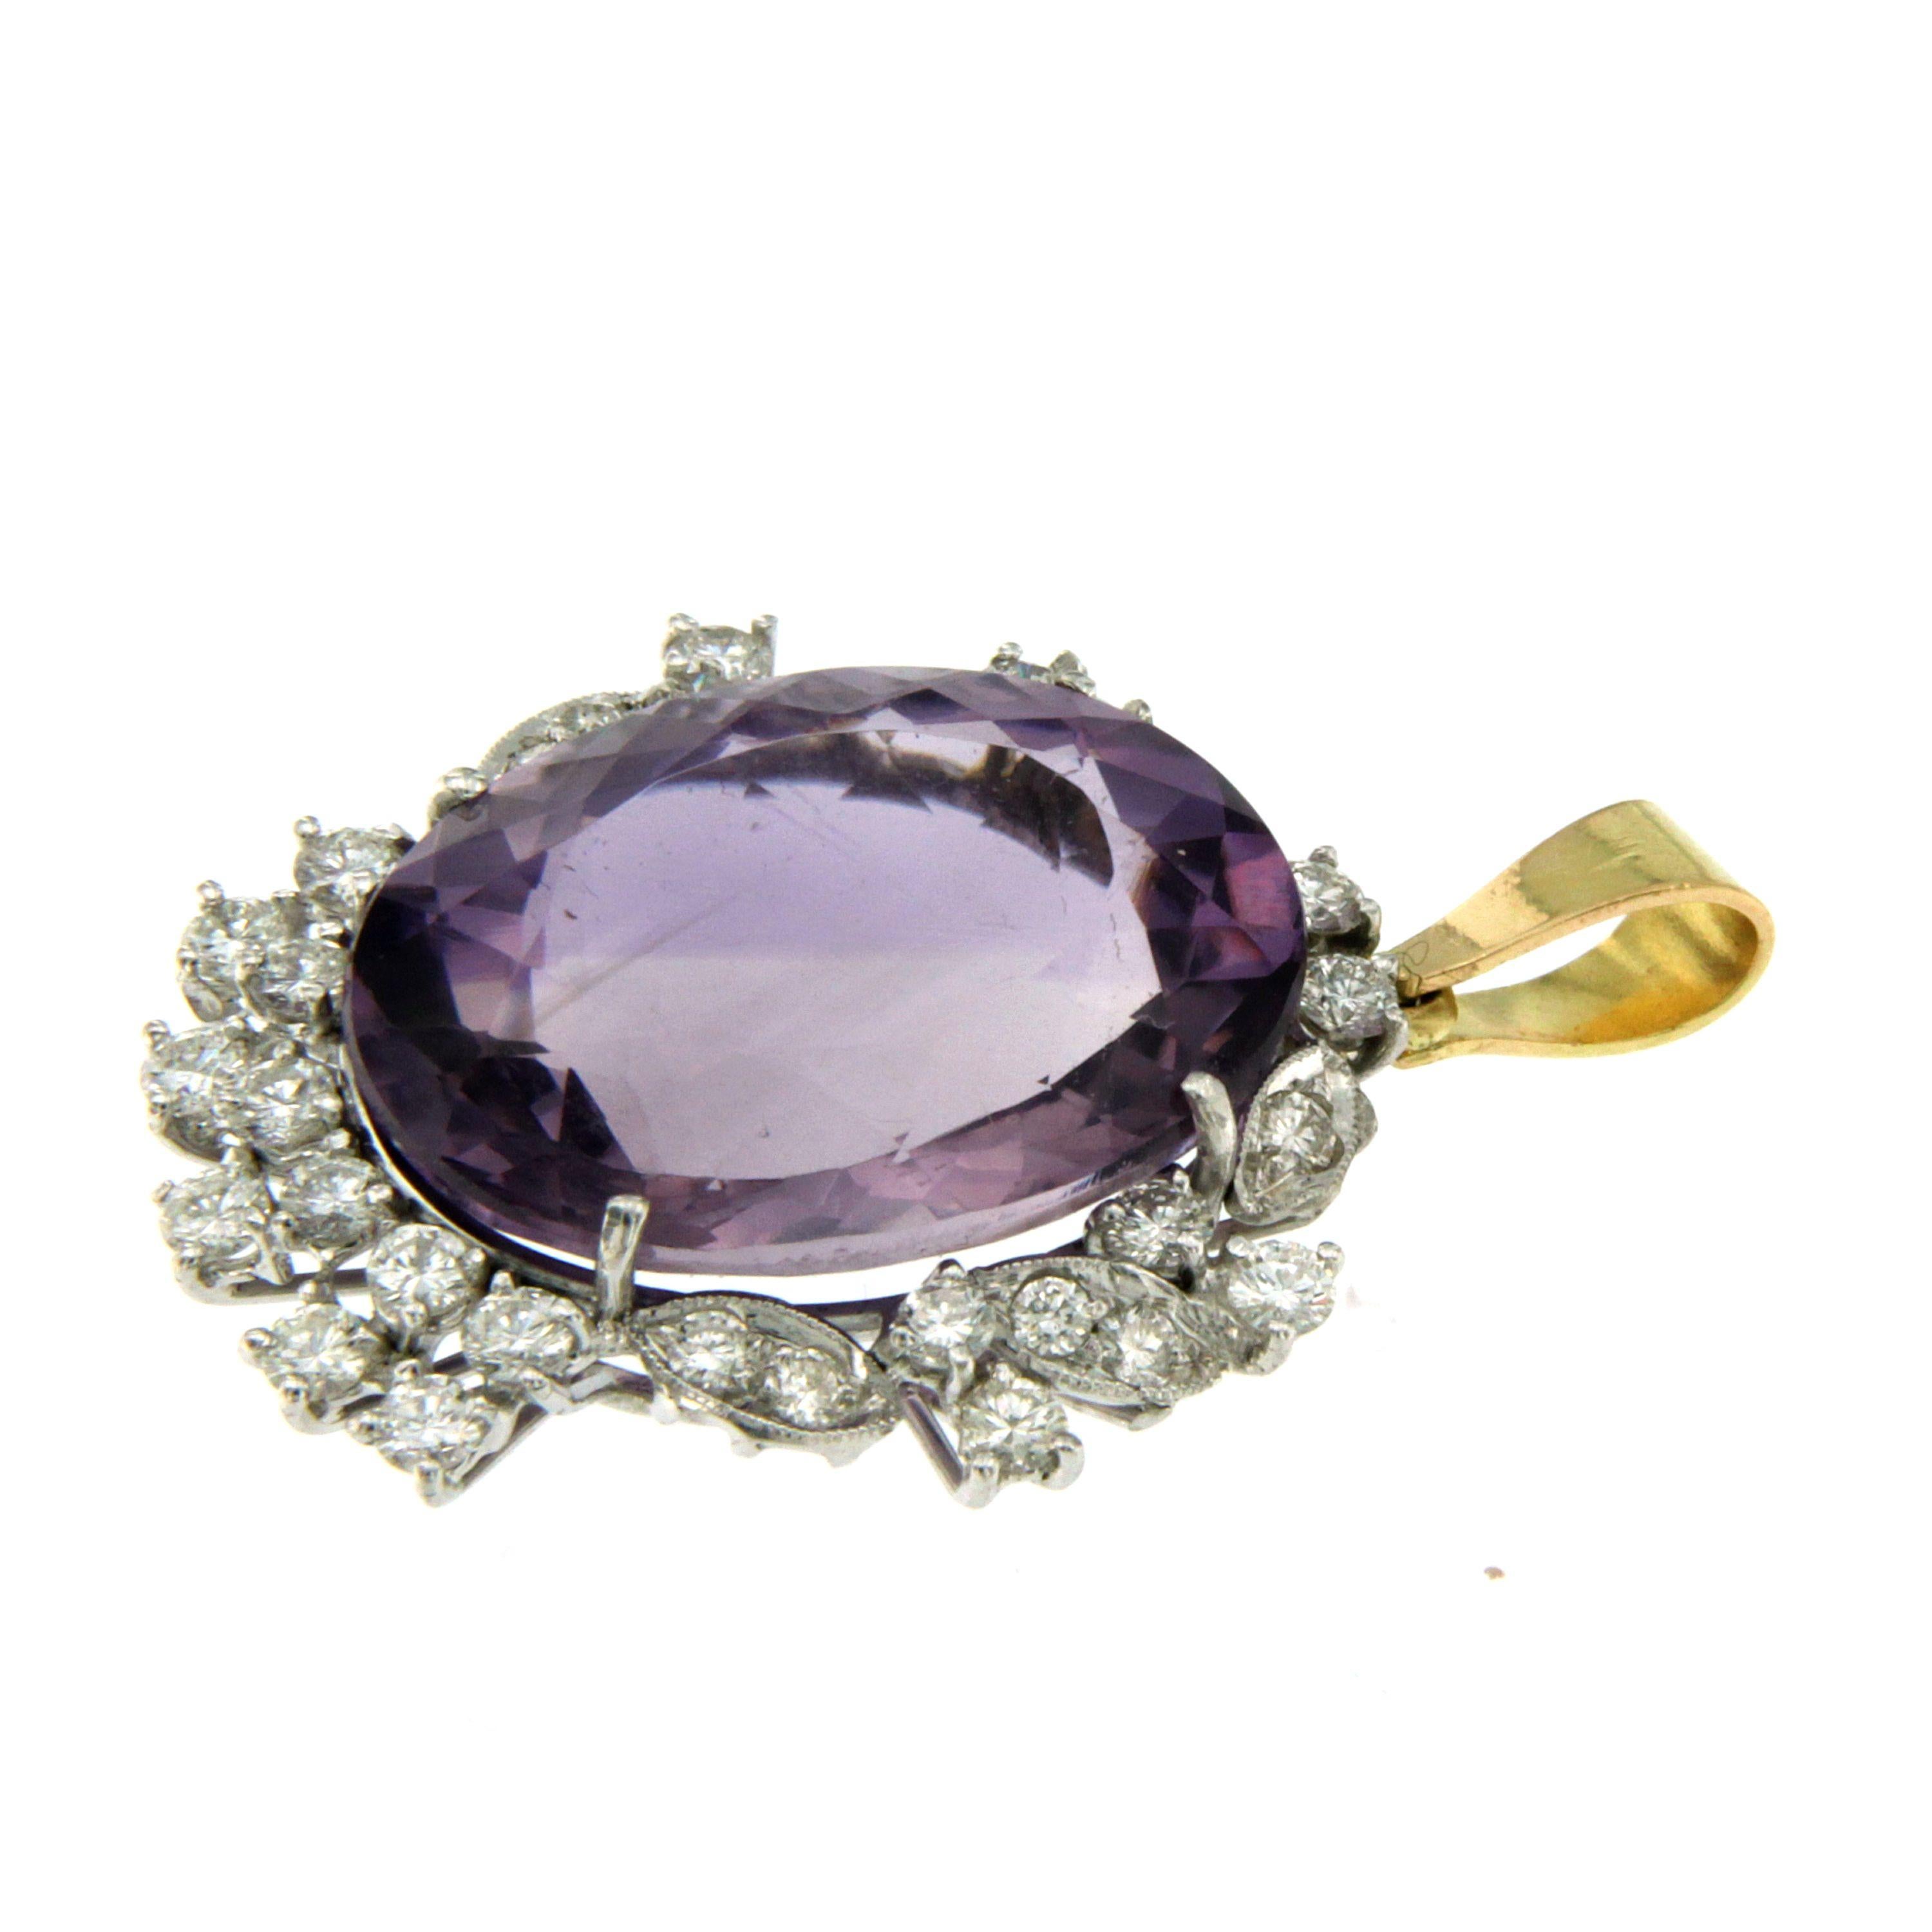 18k White and Yellow Gold (only the bail in yellow gold) Amethyst Diamond Pendant Necklace

This piece is crafted from 18k gold and weighs 7,35 grams. It features a beautiful Amethyst 9 carats surrounded approximately 1.50 ct Sparkling Round